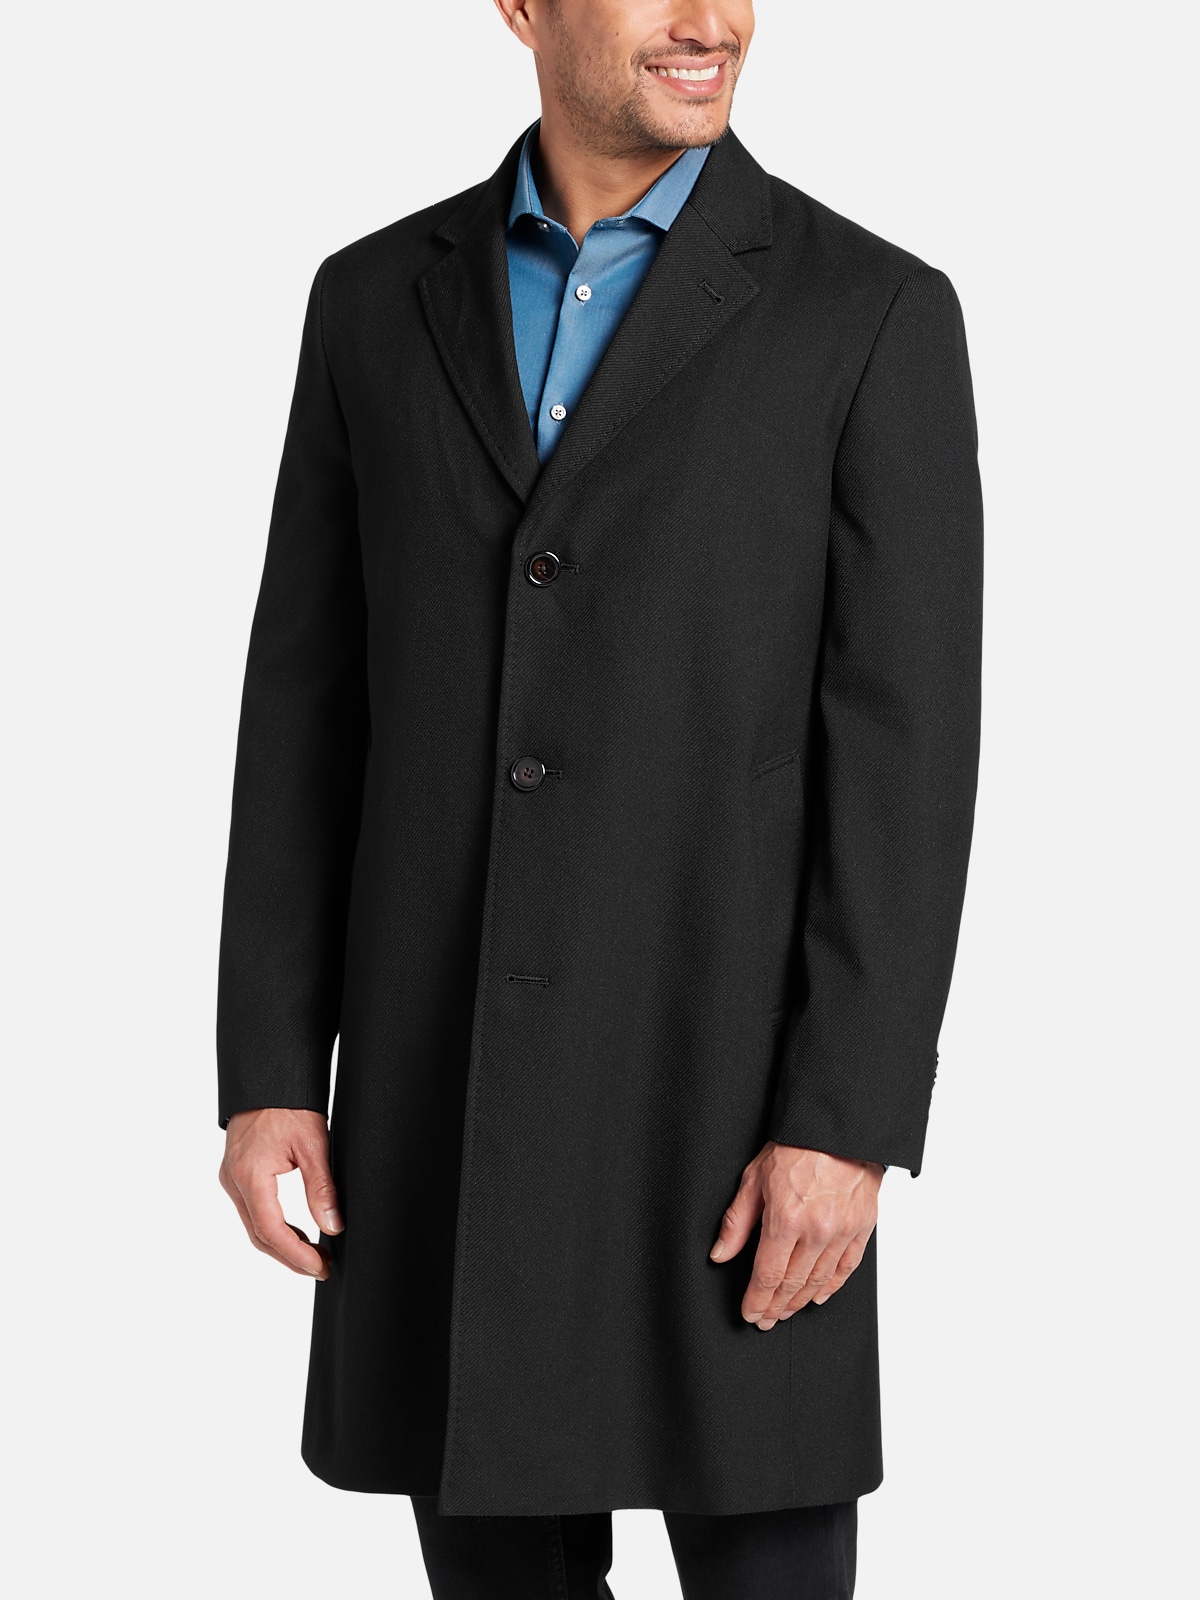 Michael Kors Classic Fit Topcoat | All Clearance $39.99| Men's Wearhouse